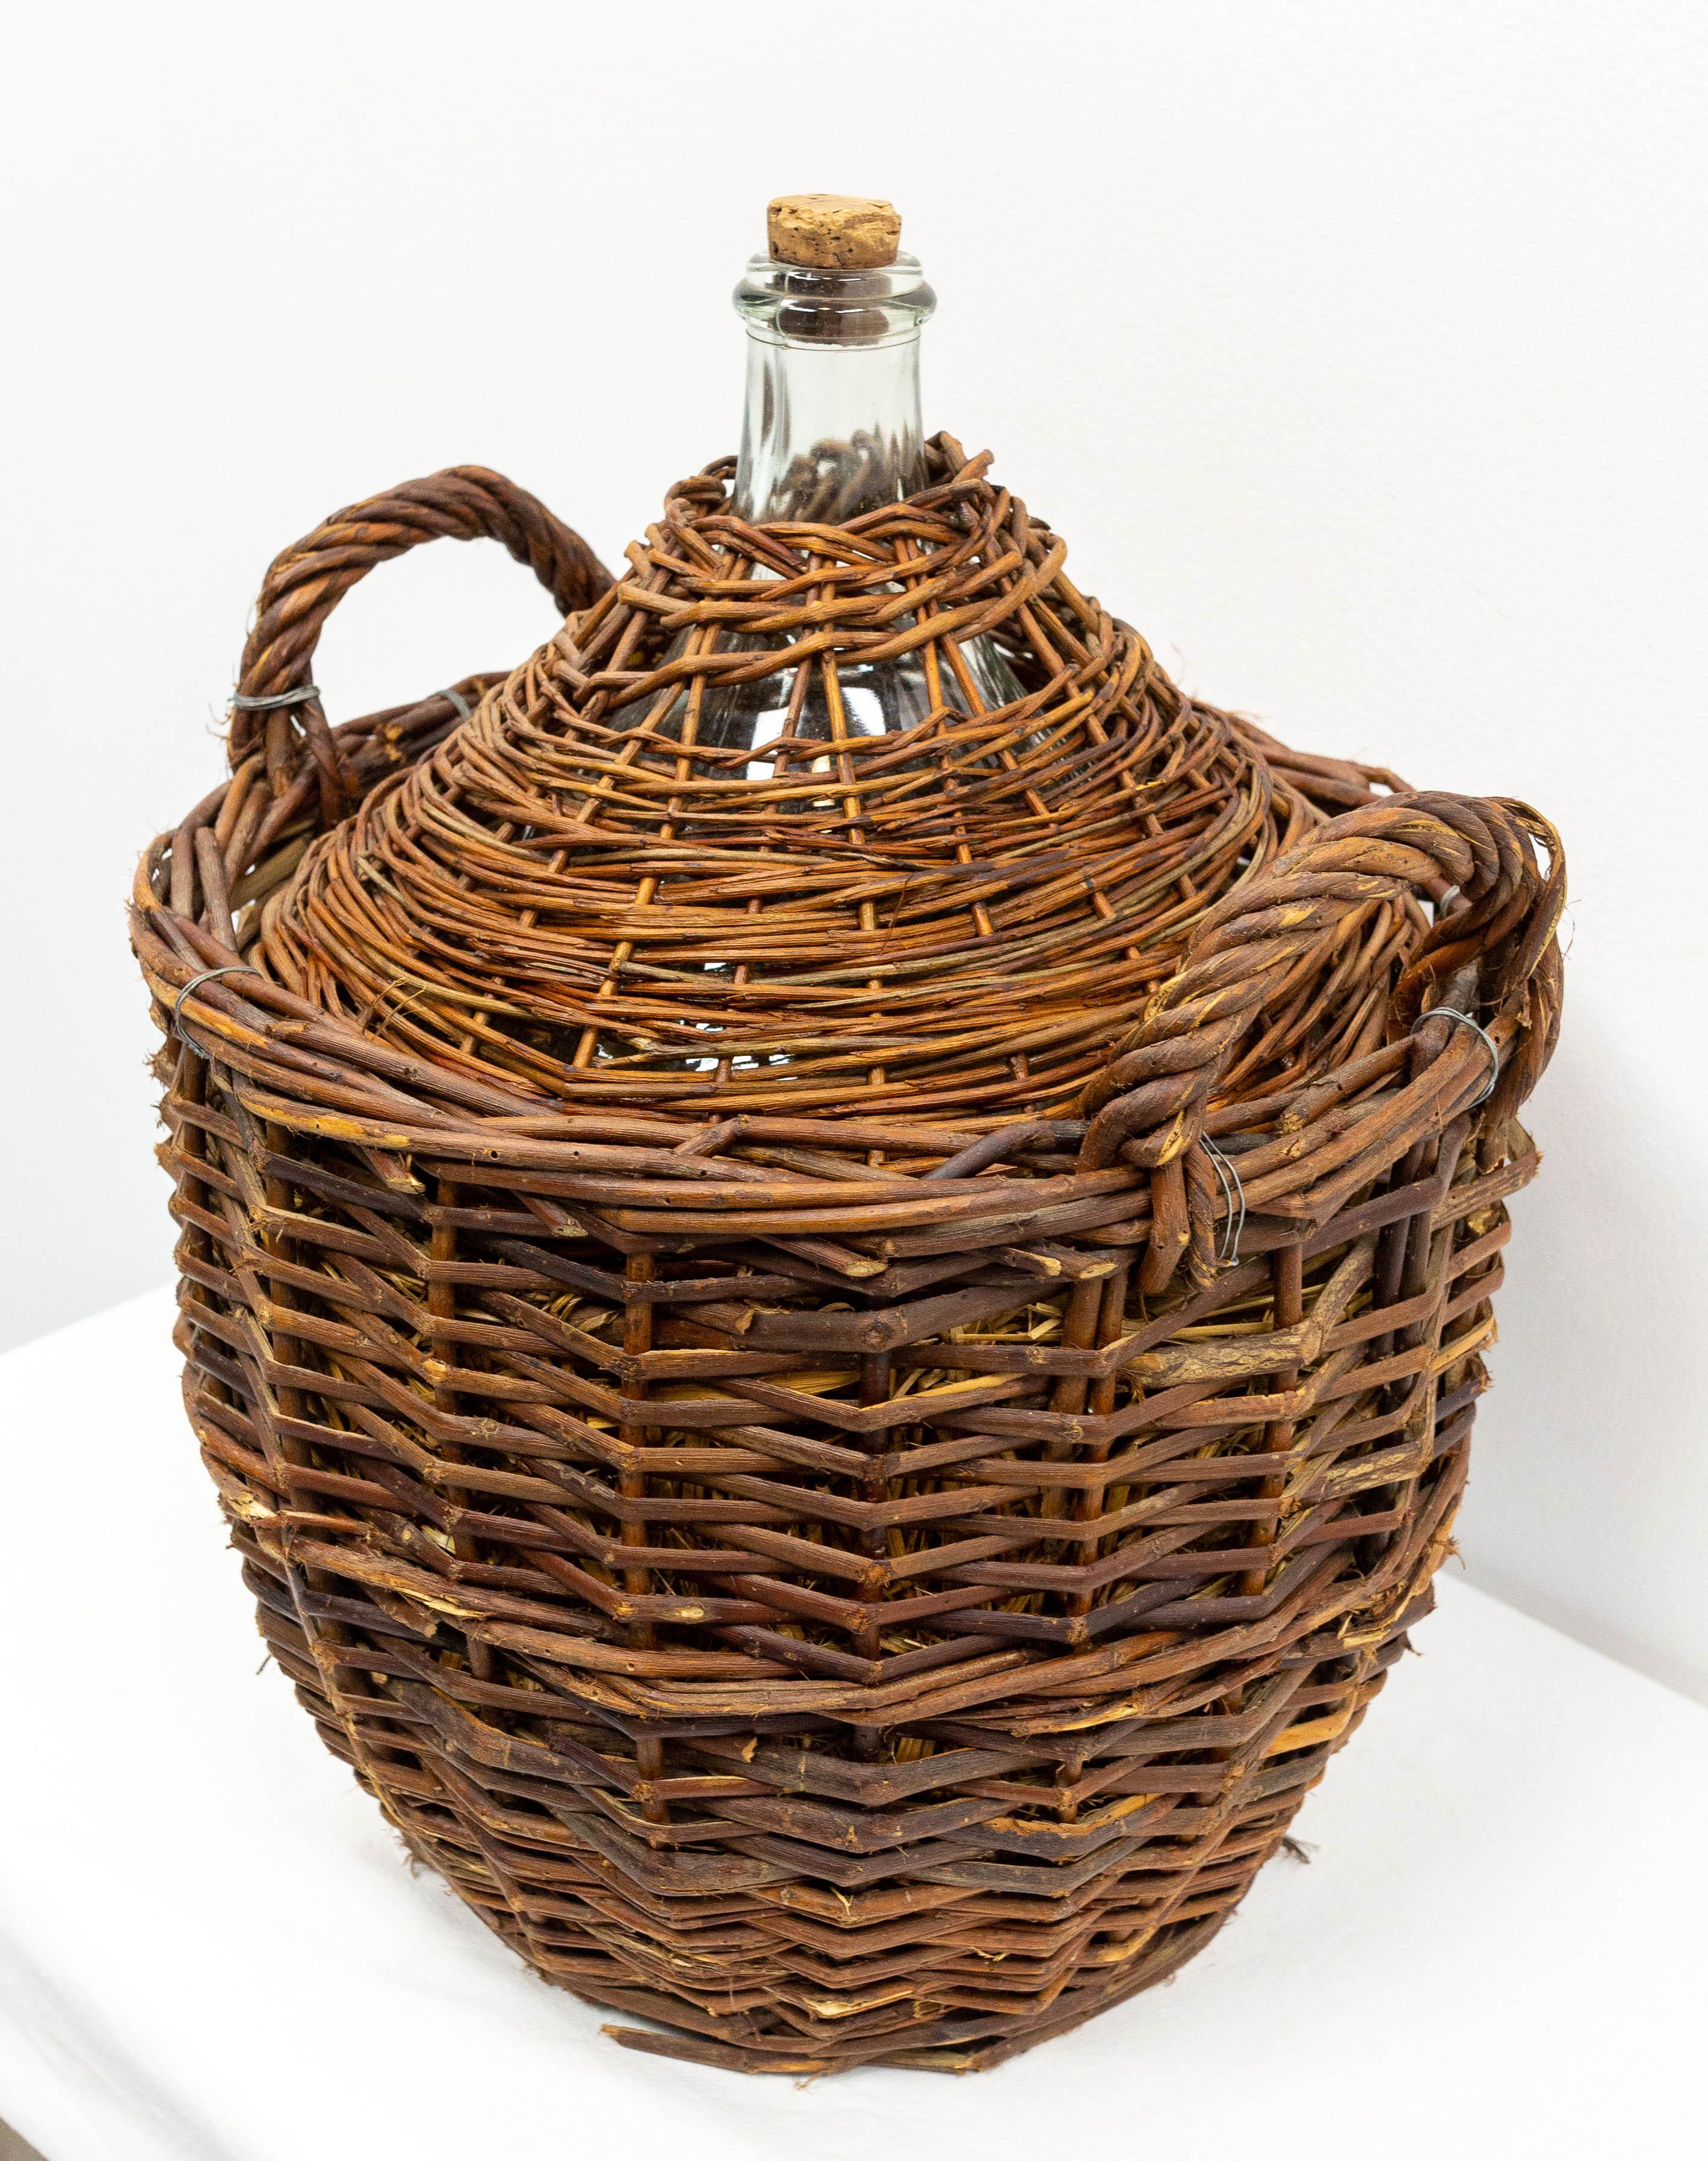 French Provincial Antique Whiteglass Bottle Demijohns or Carboy in Authentic Wicker Basket, France For Sale